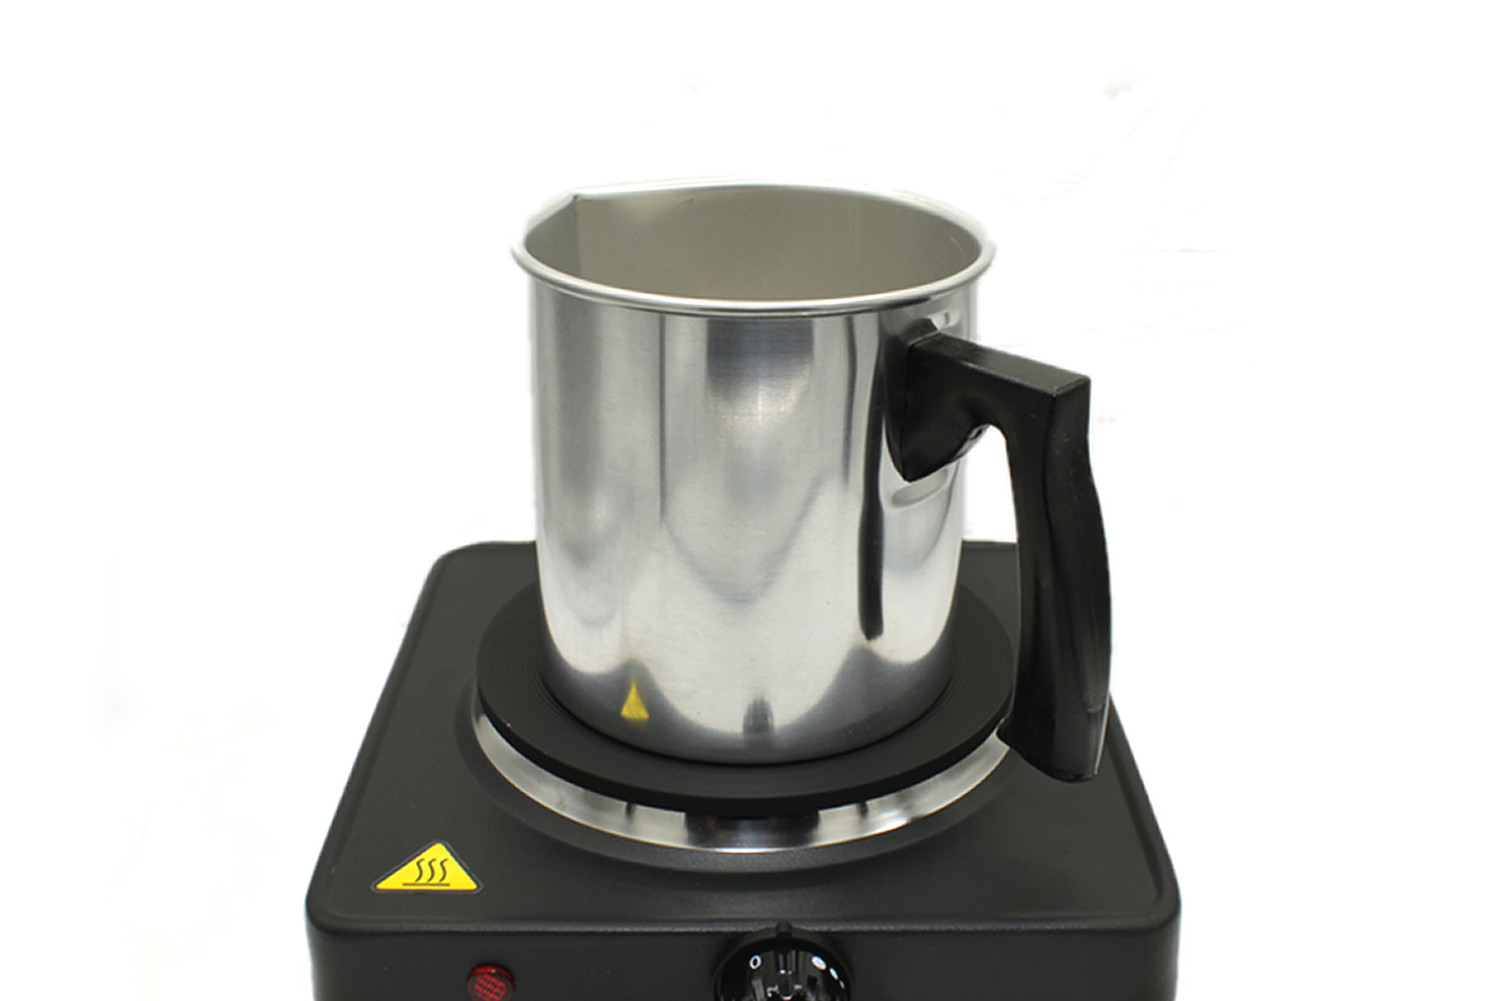 Hot Candle Making Pouring Pot With Electric Hot Plate For Melting